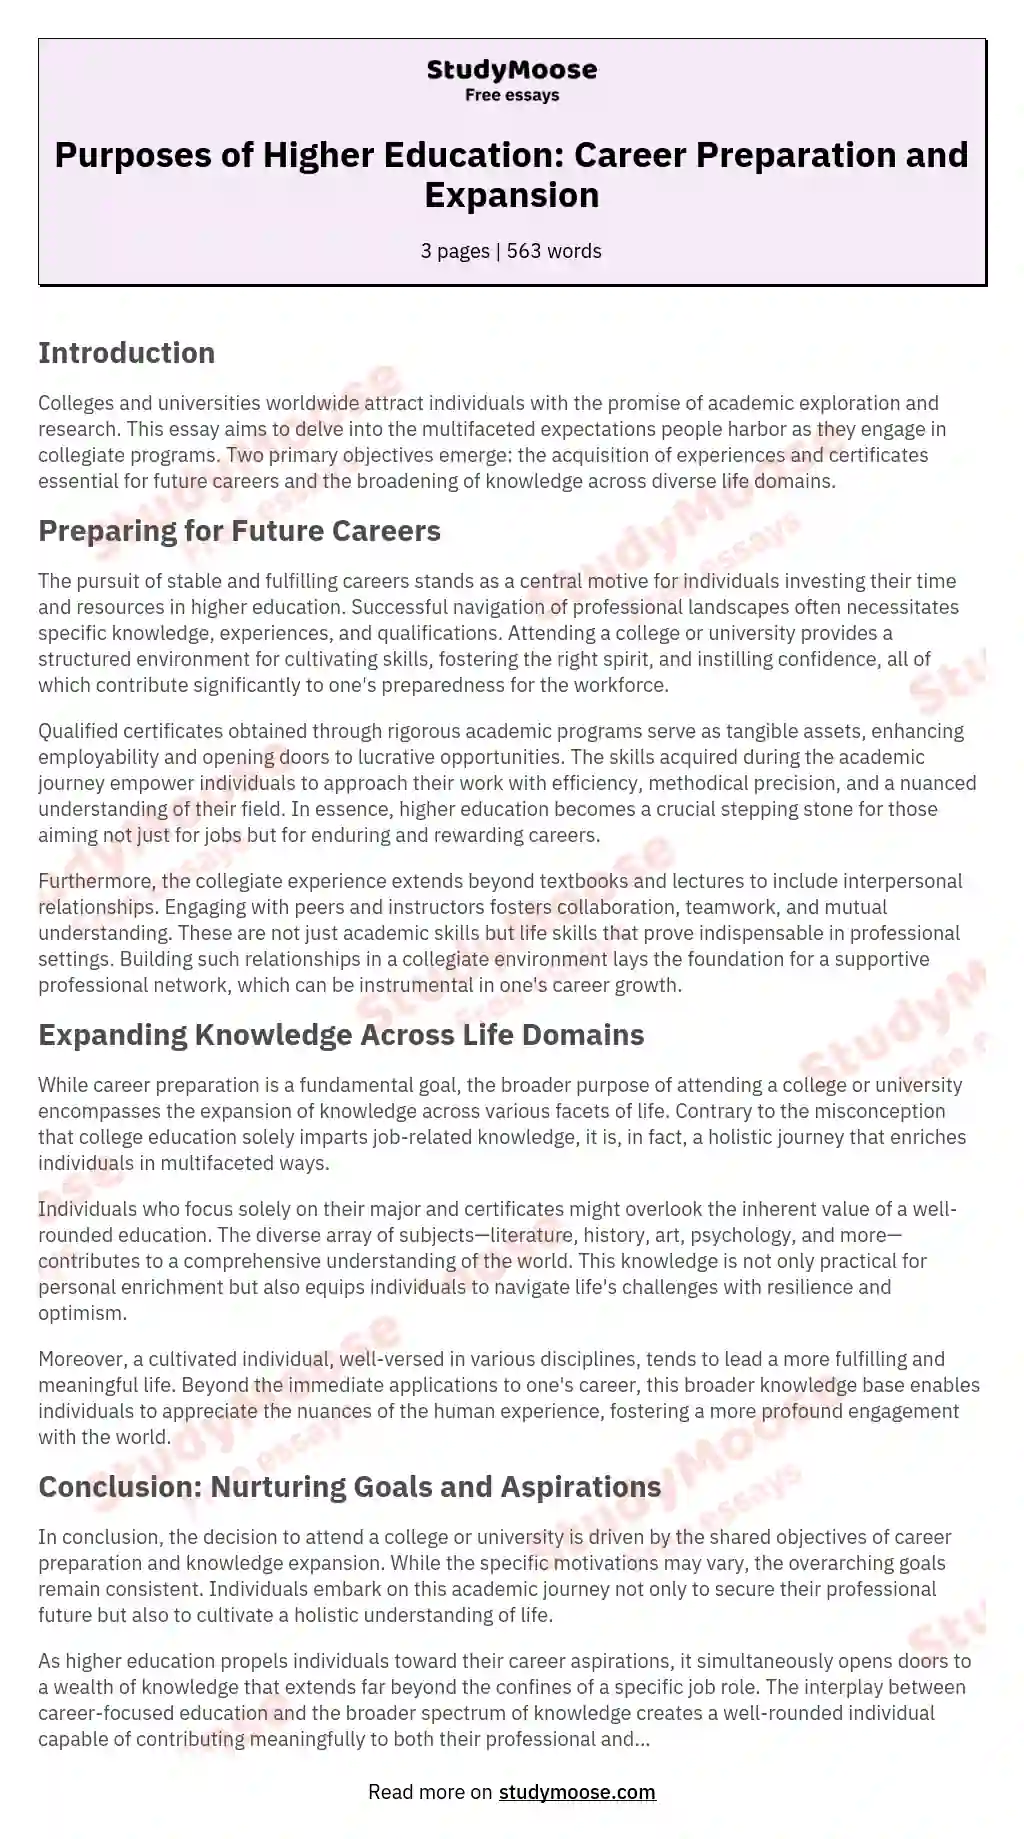 Purposes of Higher Education: Career Preparation and Expansion essay